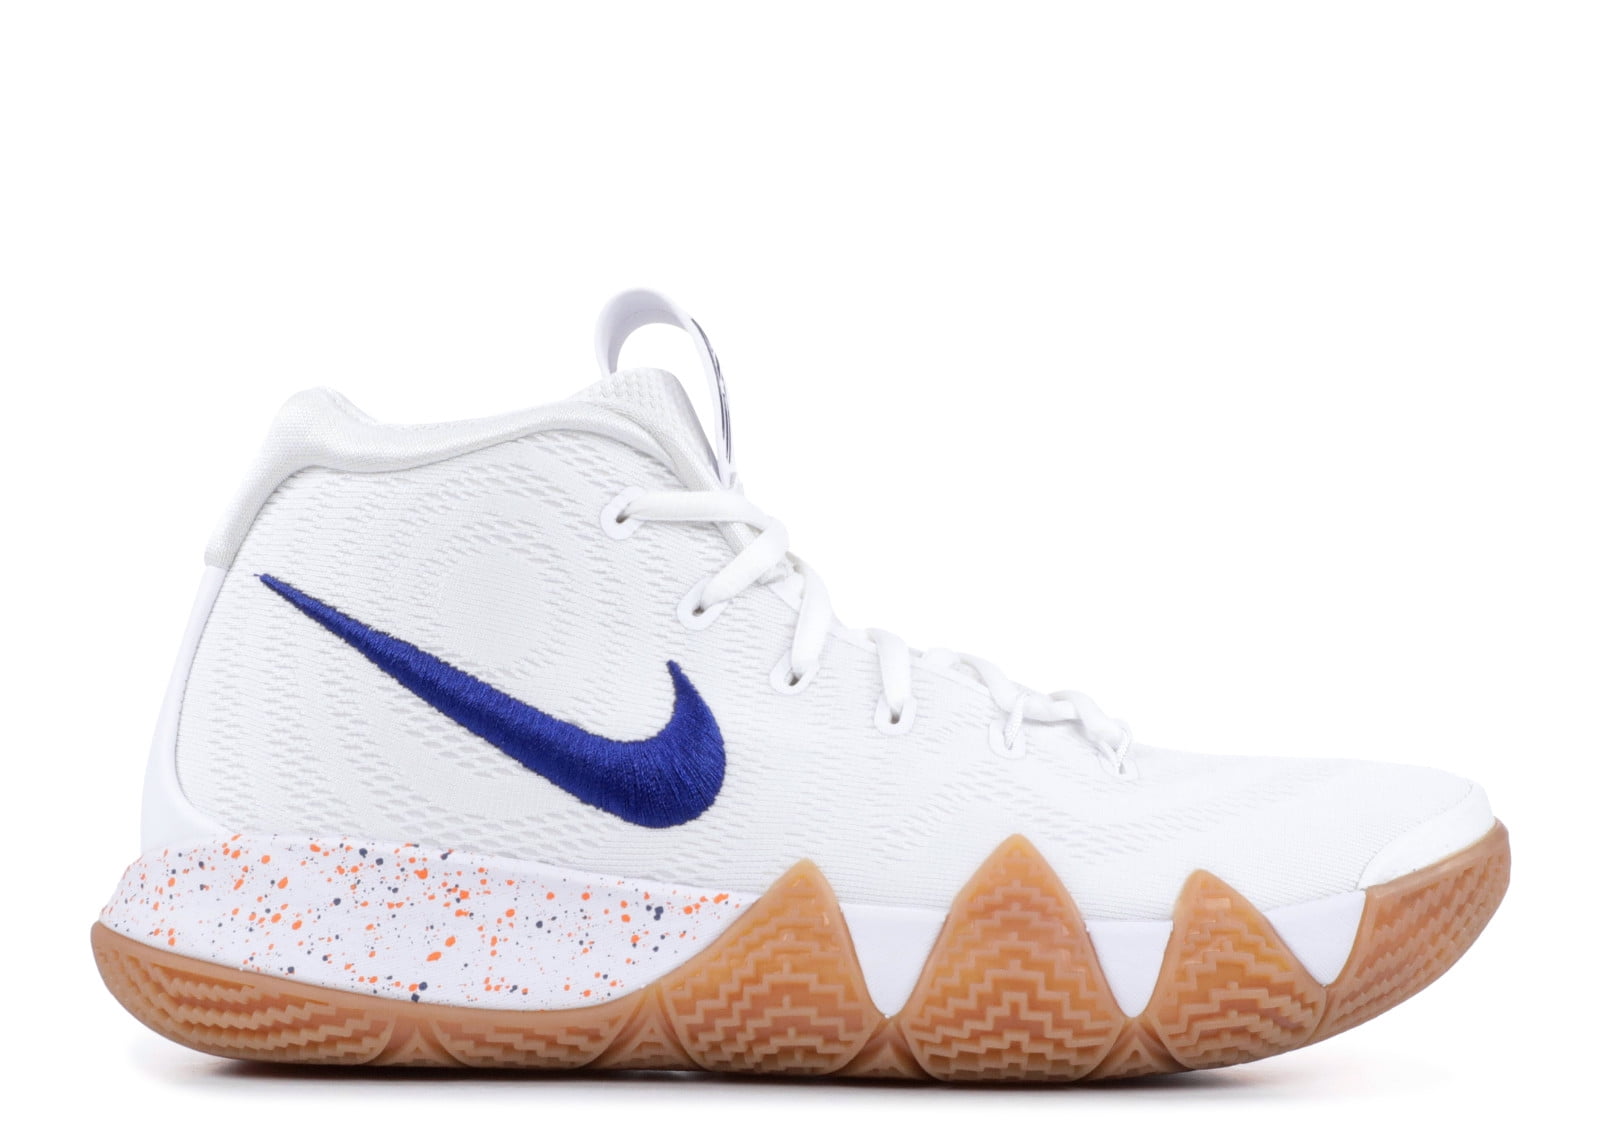 kyrie 4 size 4 cheap online